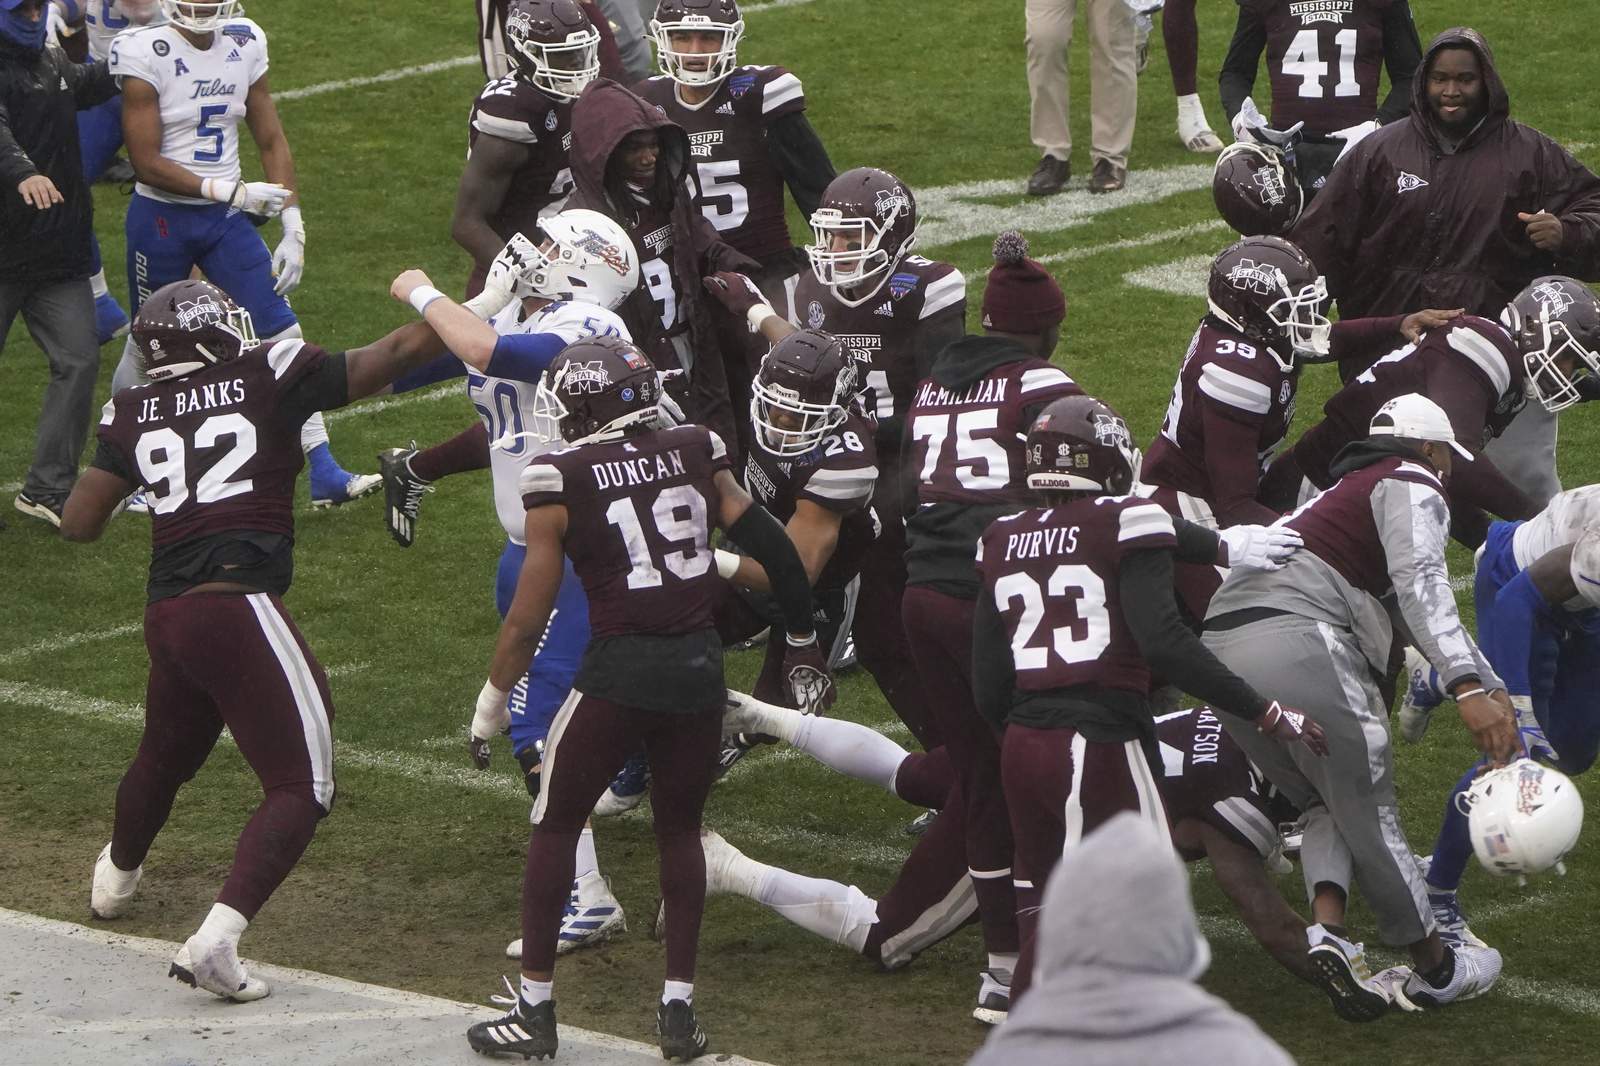 Brawl mars Mississippi State's Armed Forces win over Tulsa